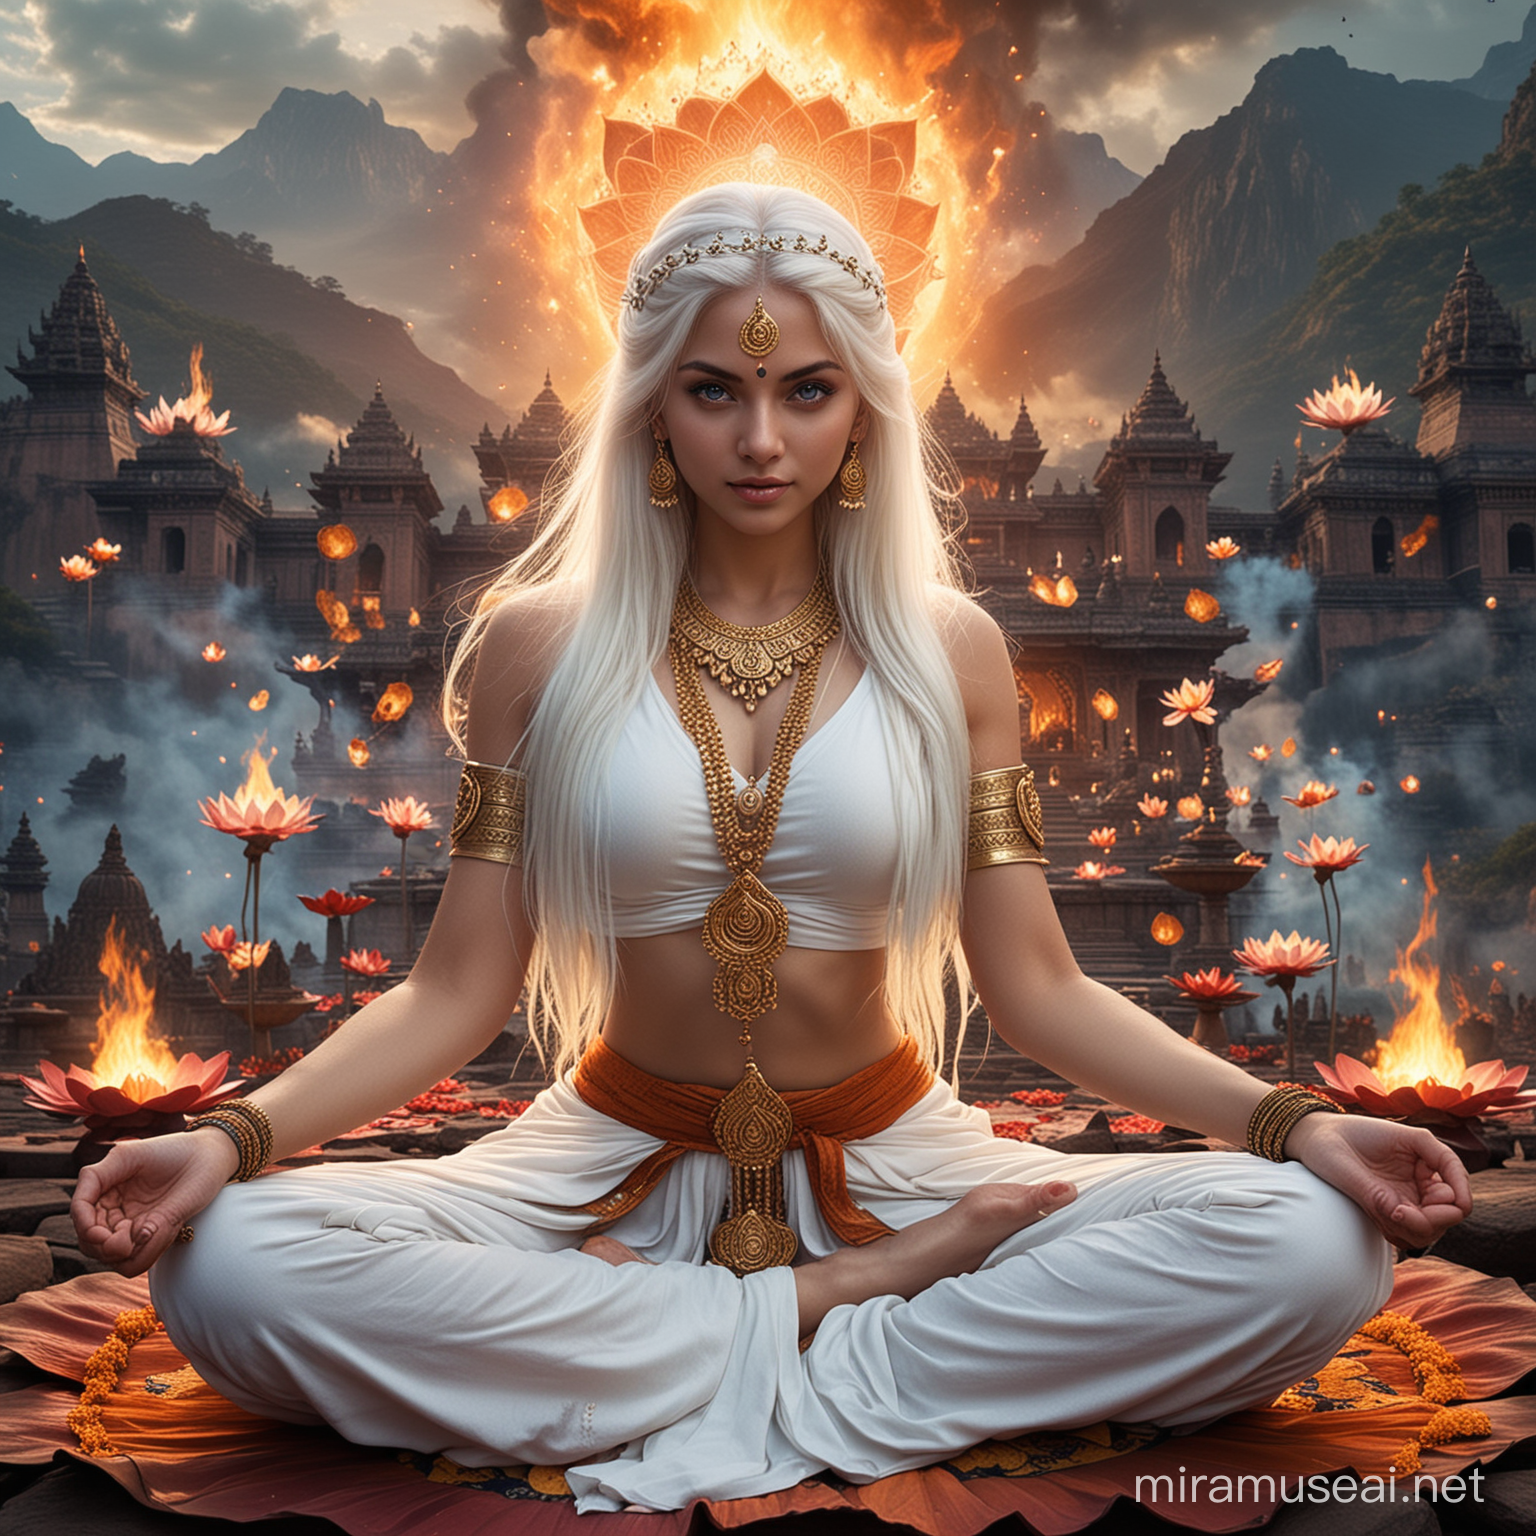 Empress Goddess in Lotus Position Amid Mystical Flames and Demonic Hindu Gods